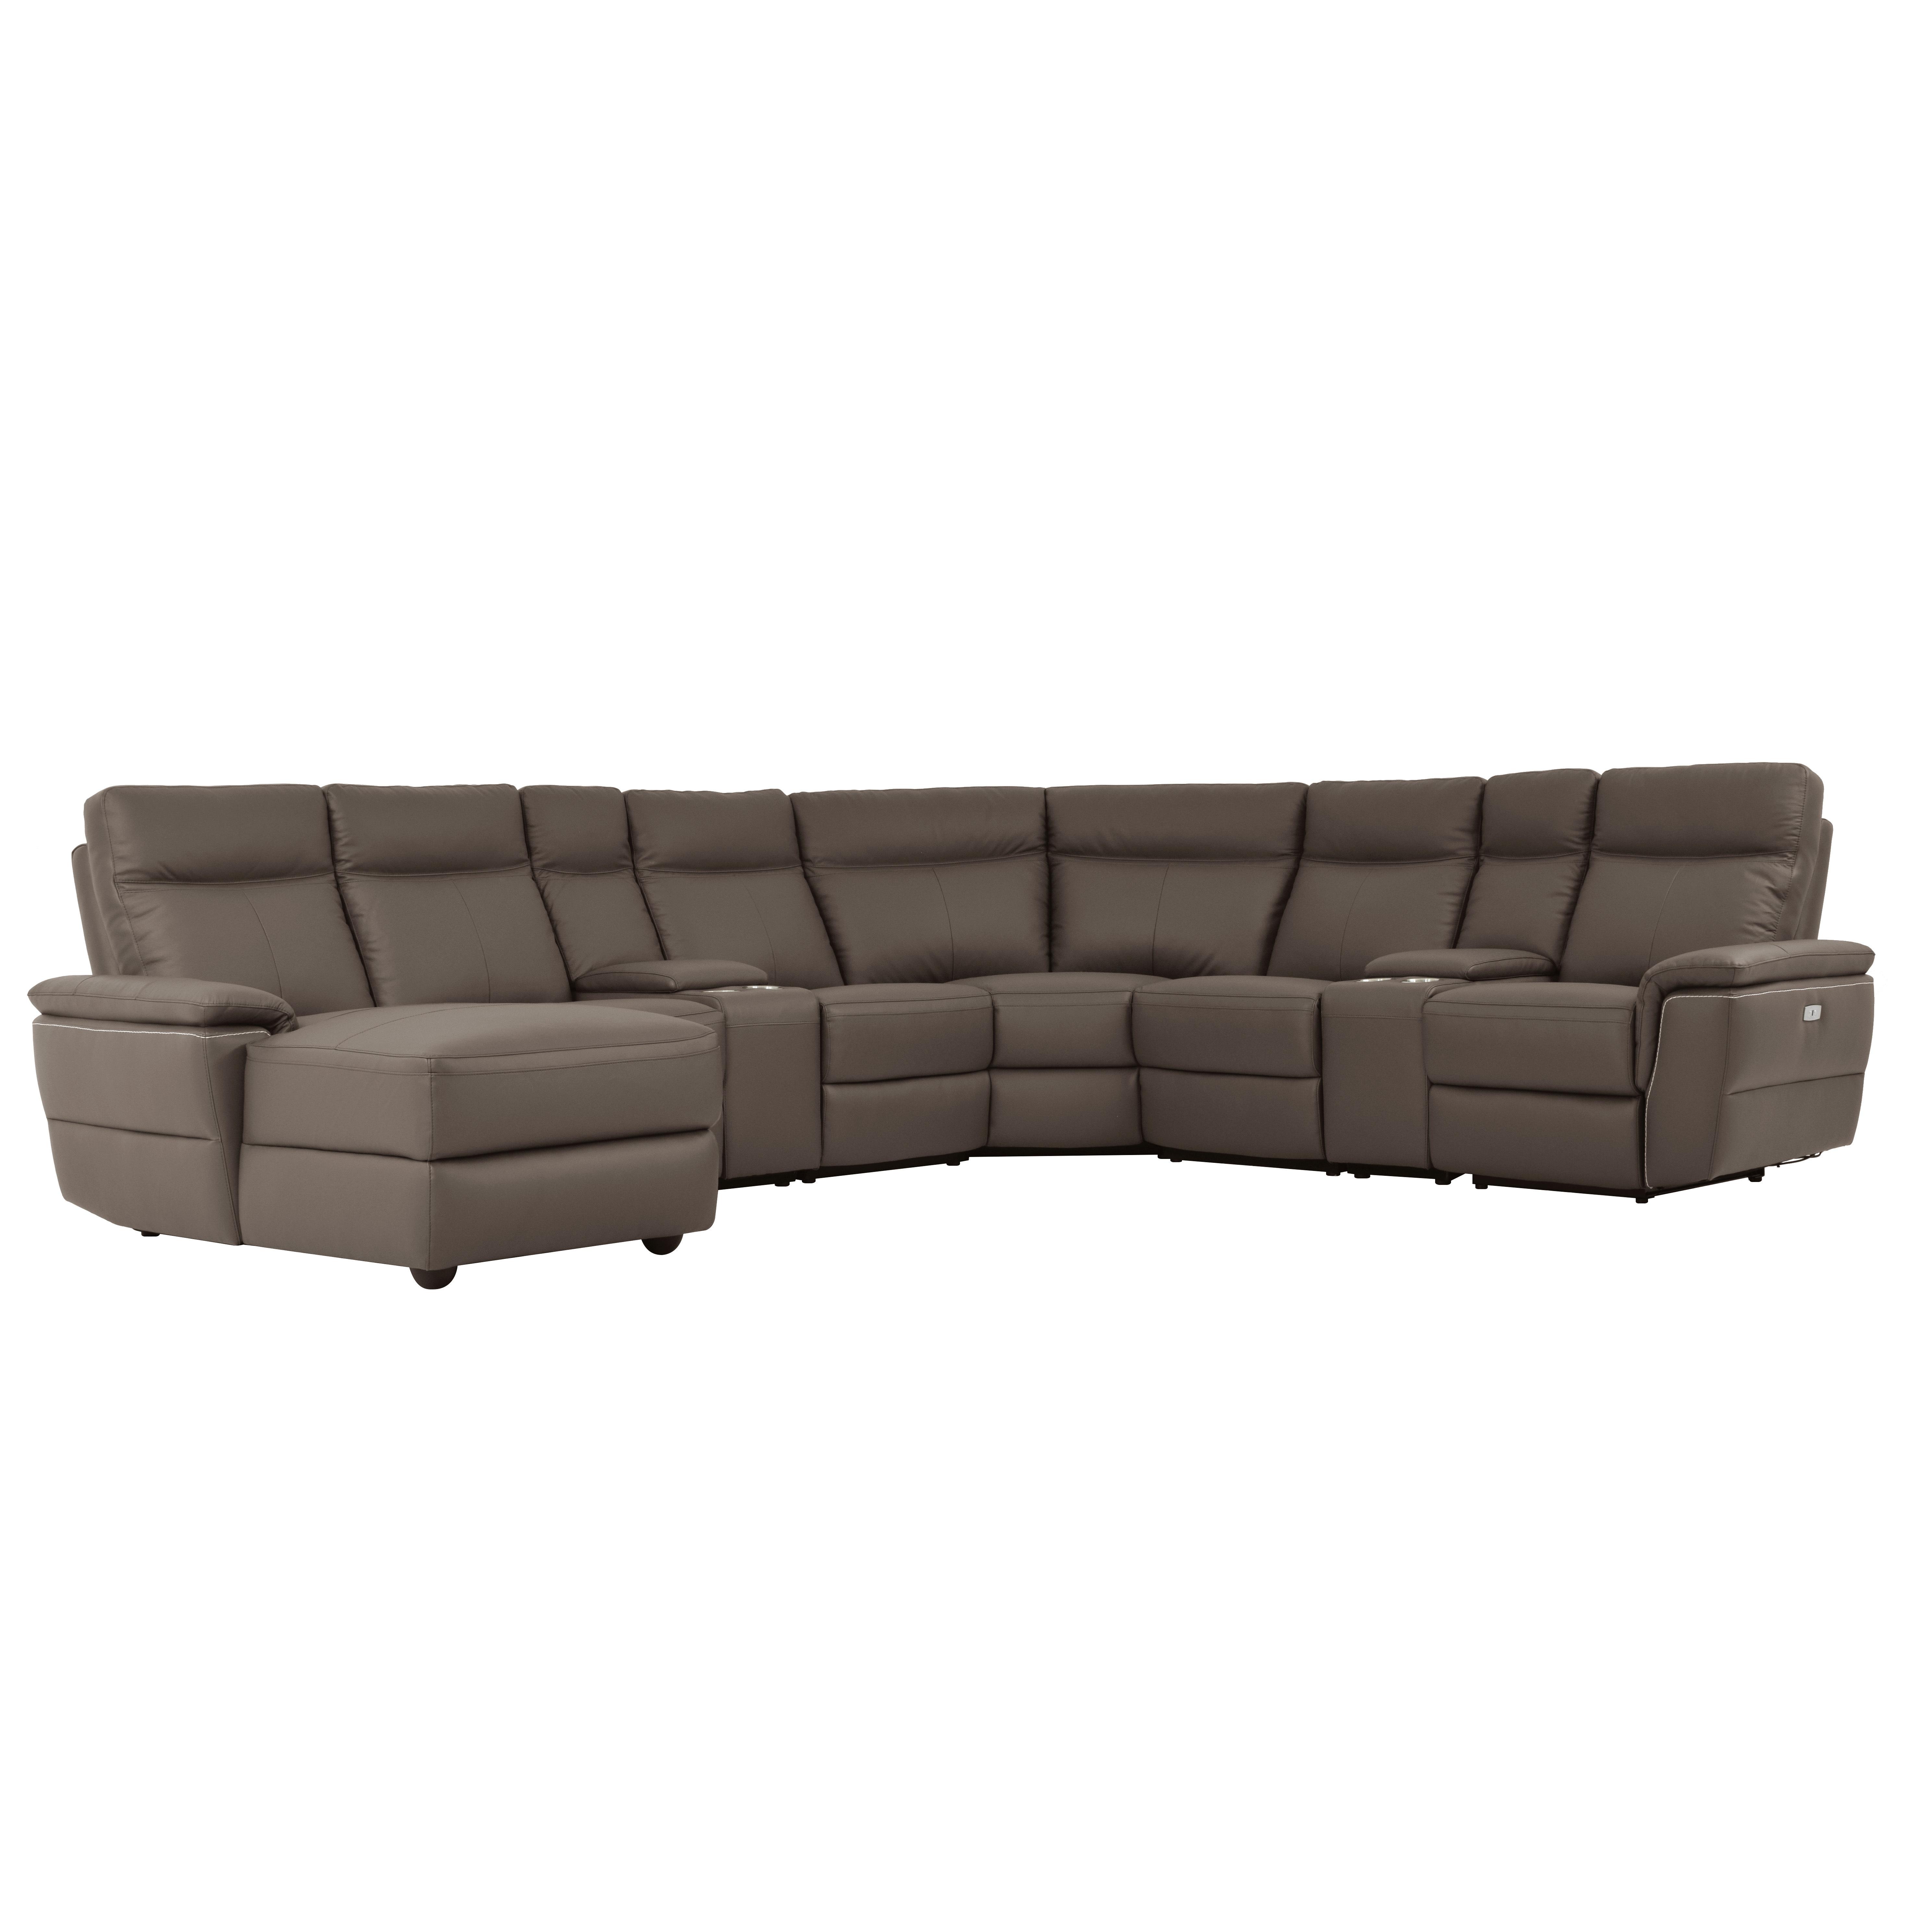 

    
Contemporary Raisin Leather 8-Piece LSF Power Reclining Sectional Homelegance 8308*8A1PW Olympia
